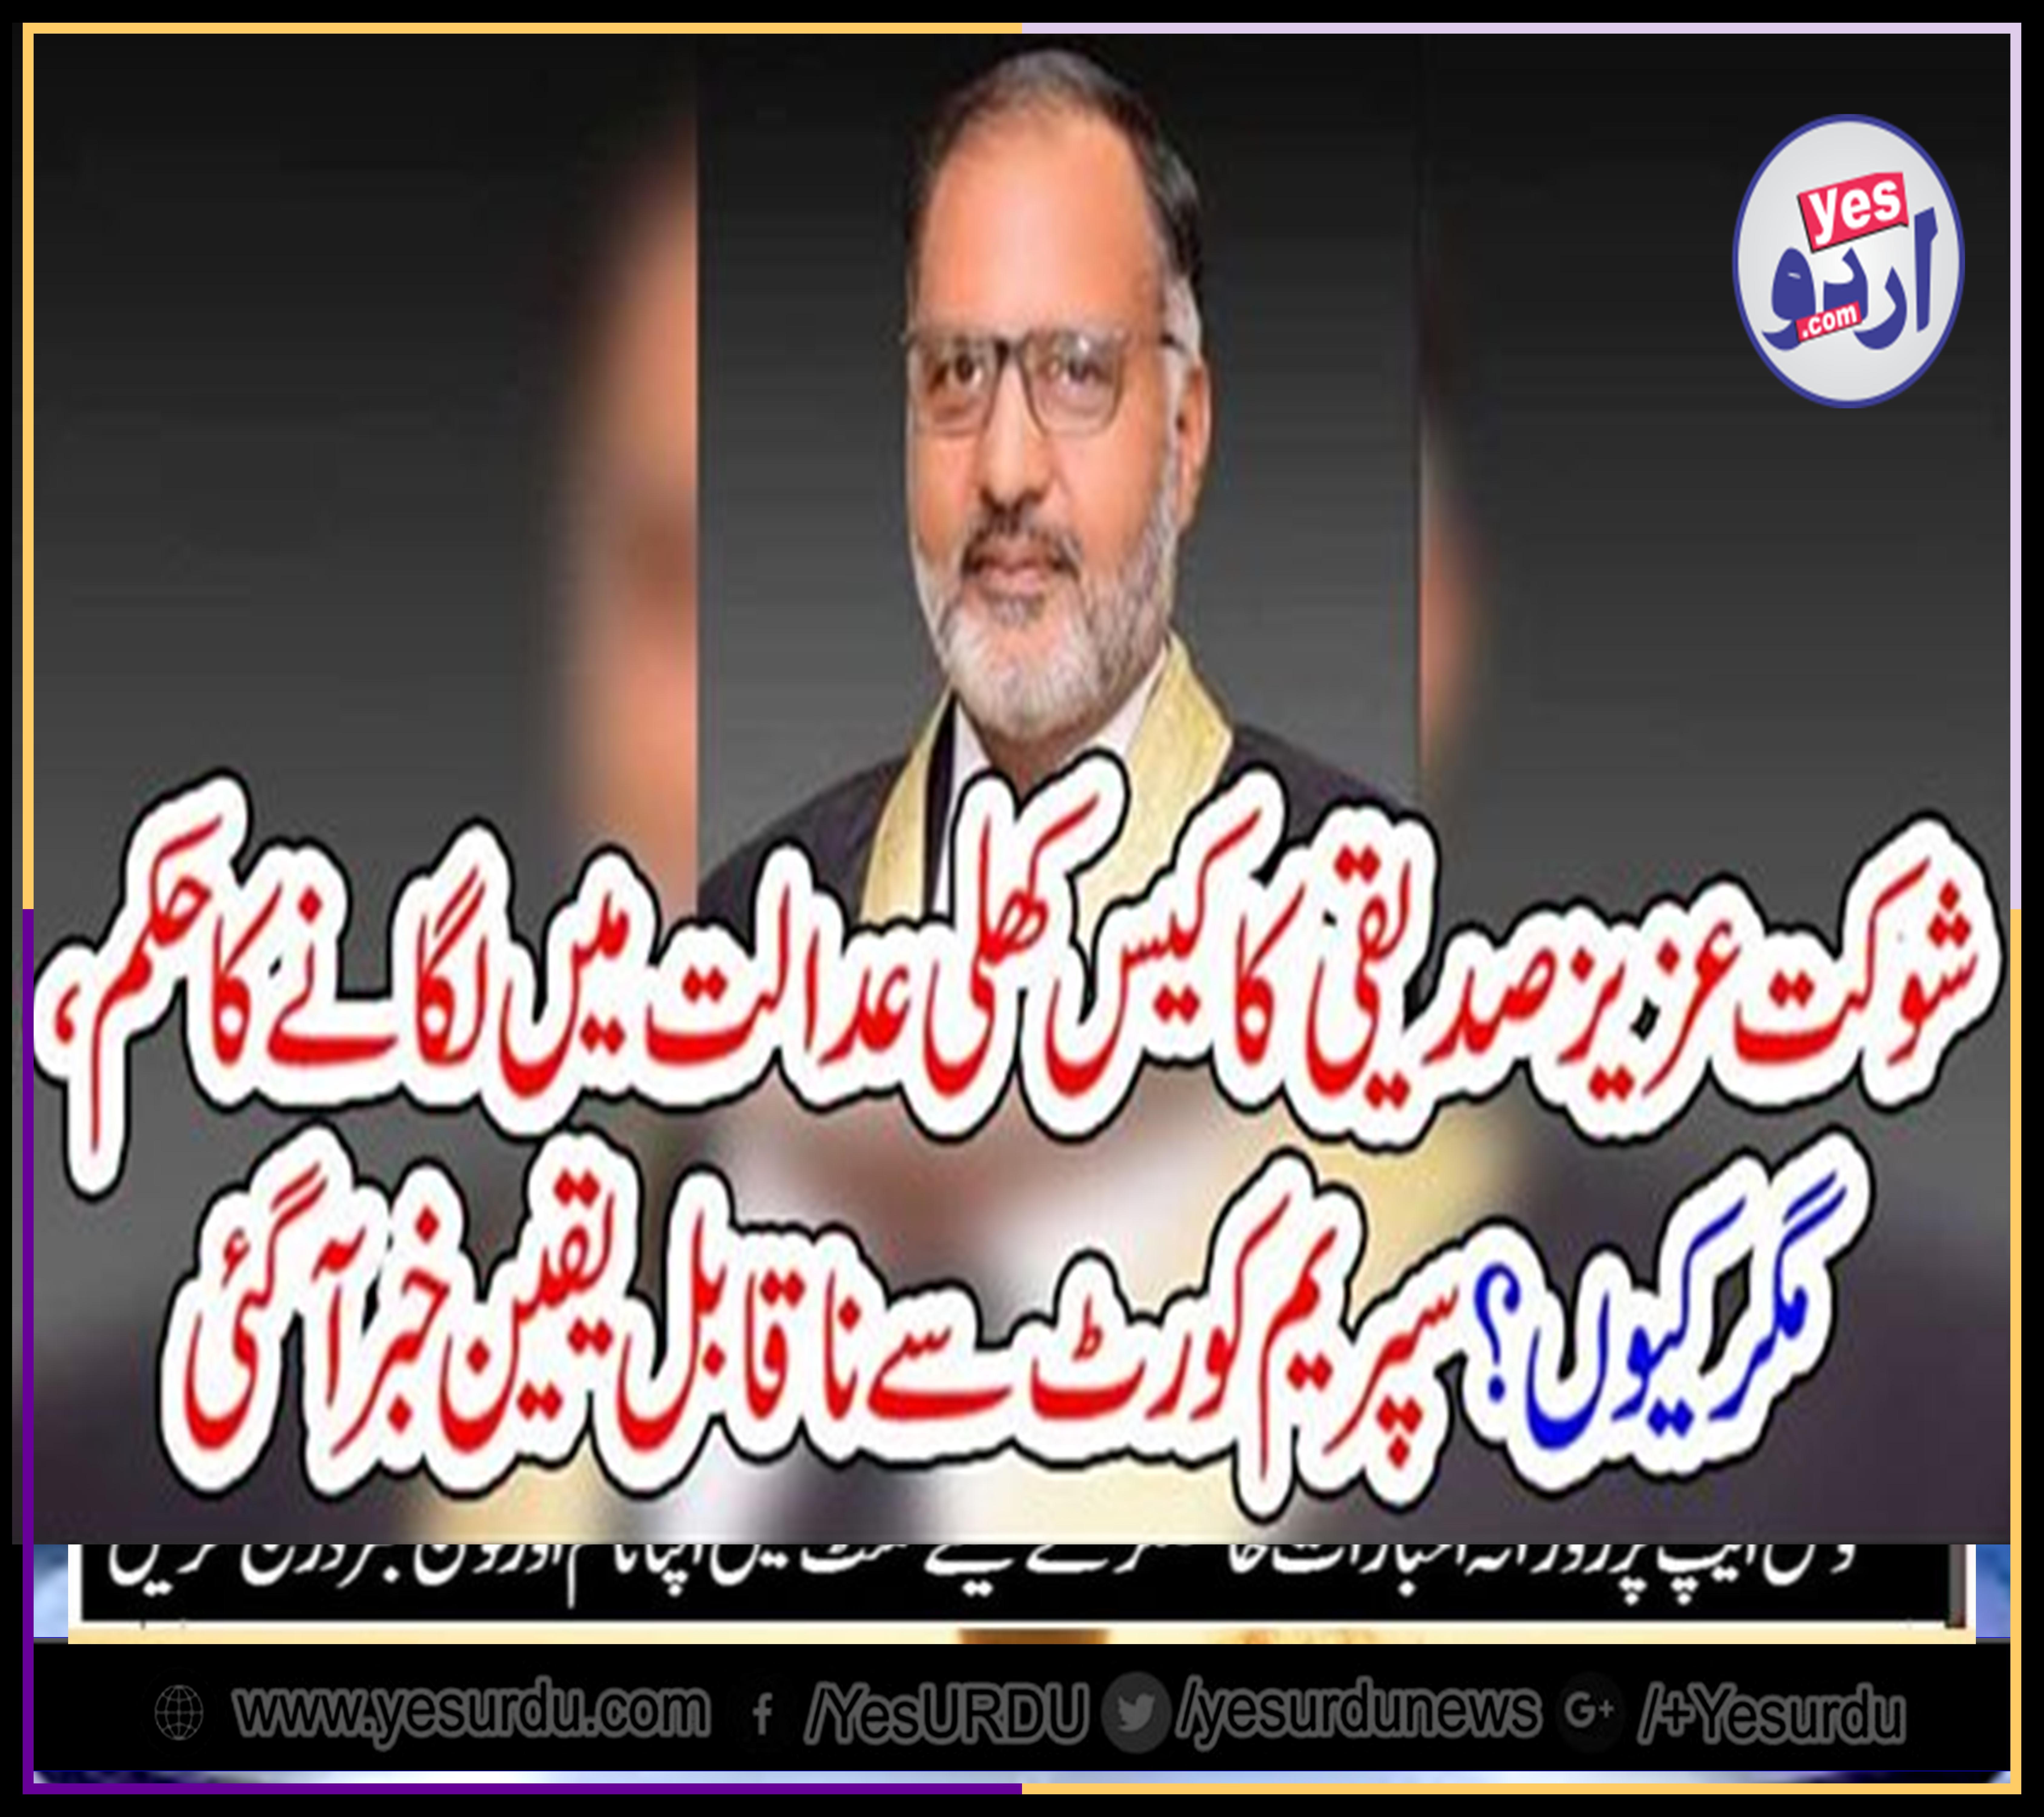 CASE, OF, EX-CHIEF JUSTICE, ISLAMABAD, HIGH COURT, SHAUKAT AZIZ SIDDIQUI, WILL, BE, A, OPEN, COURT, TRIAL